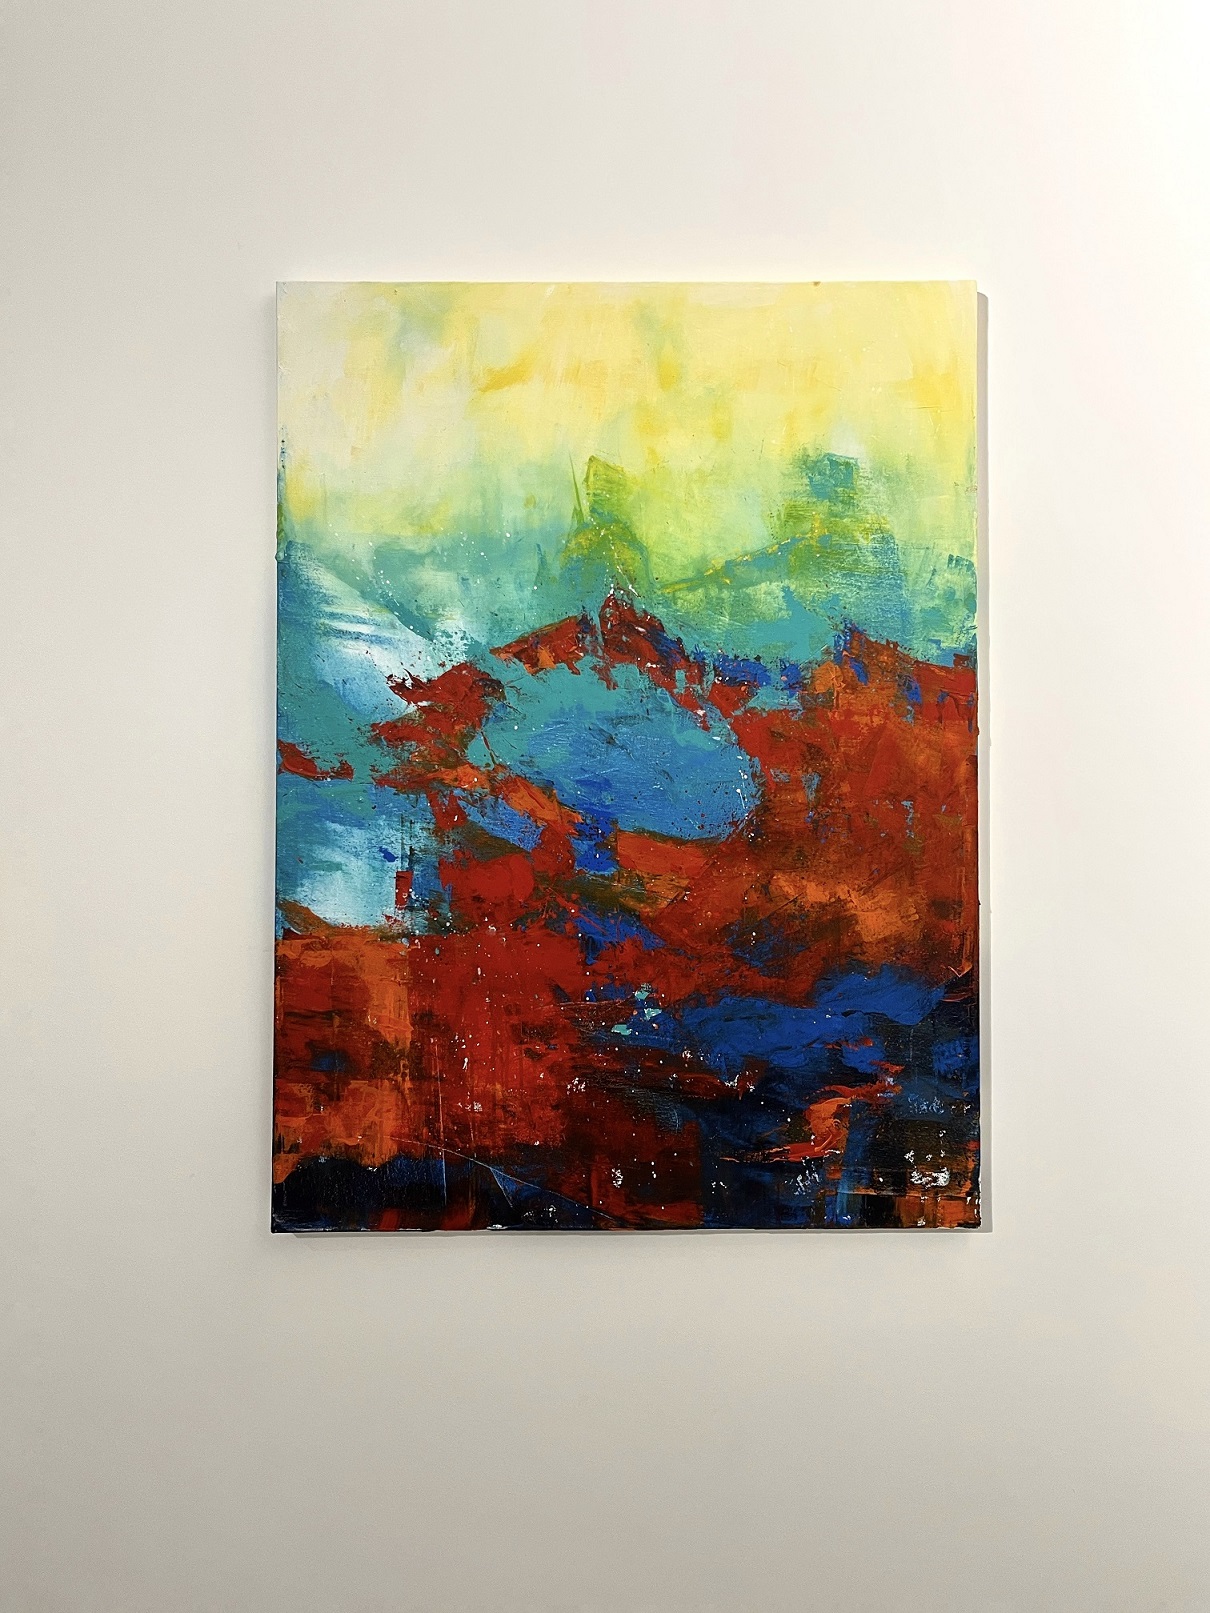 Vibrant Fusion: Textured Abstract Painting in Yellow, Blue, and Red